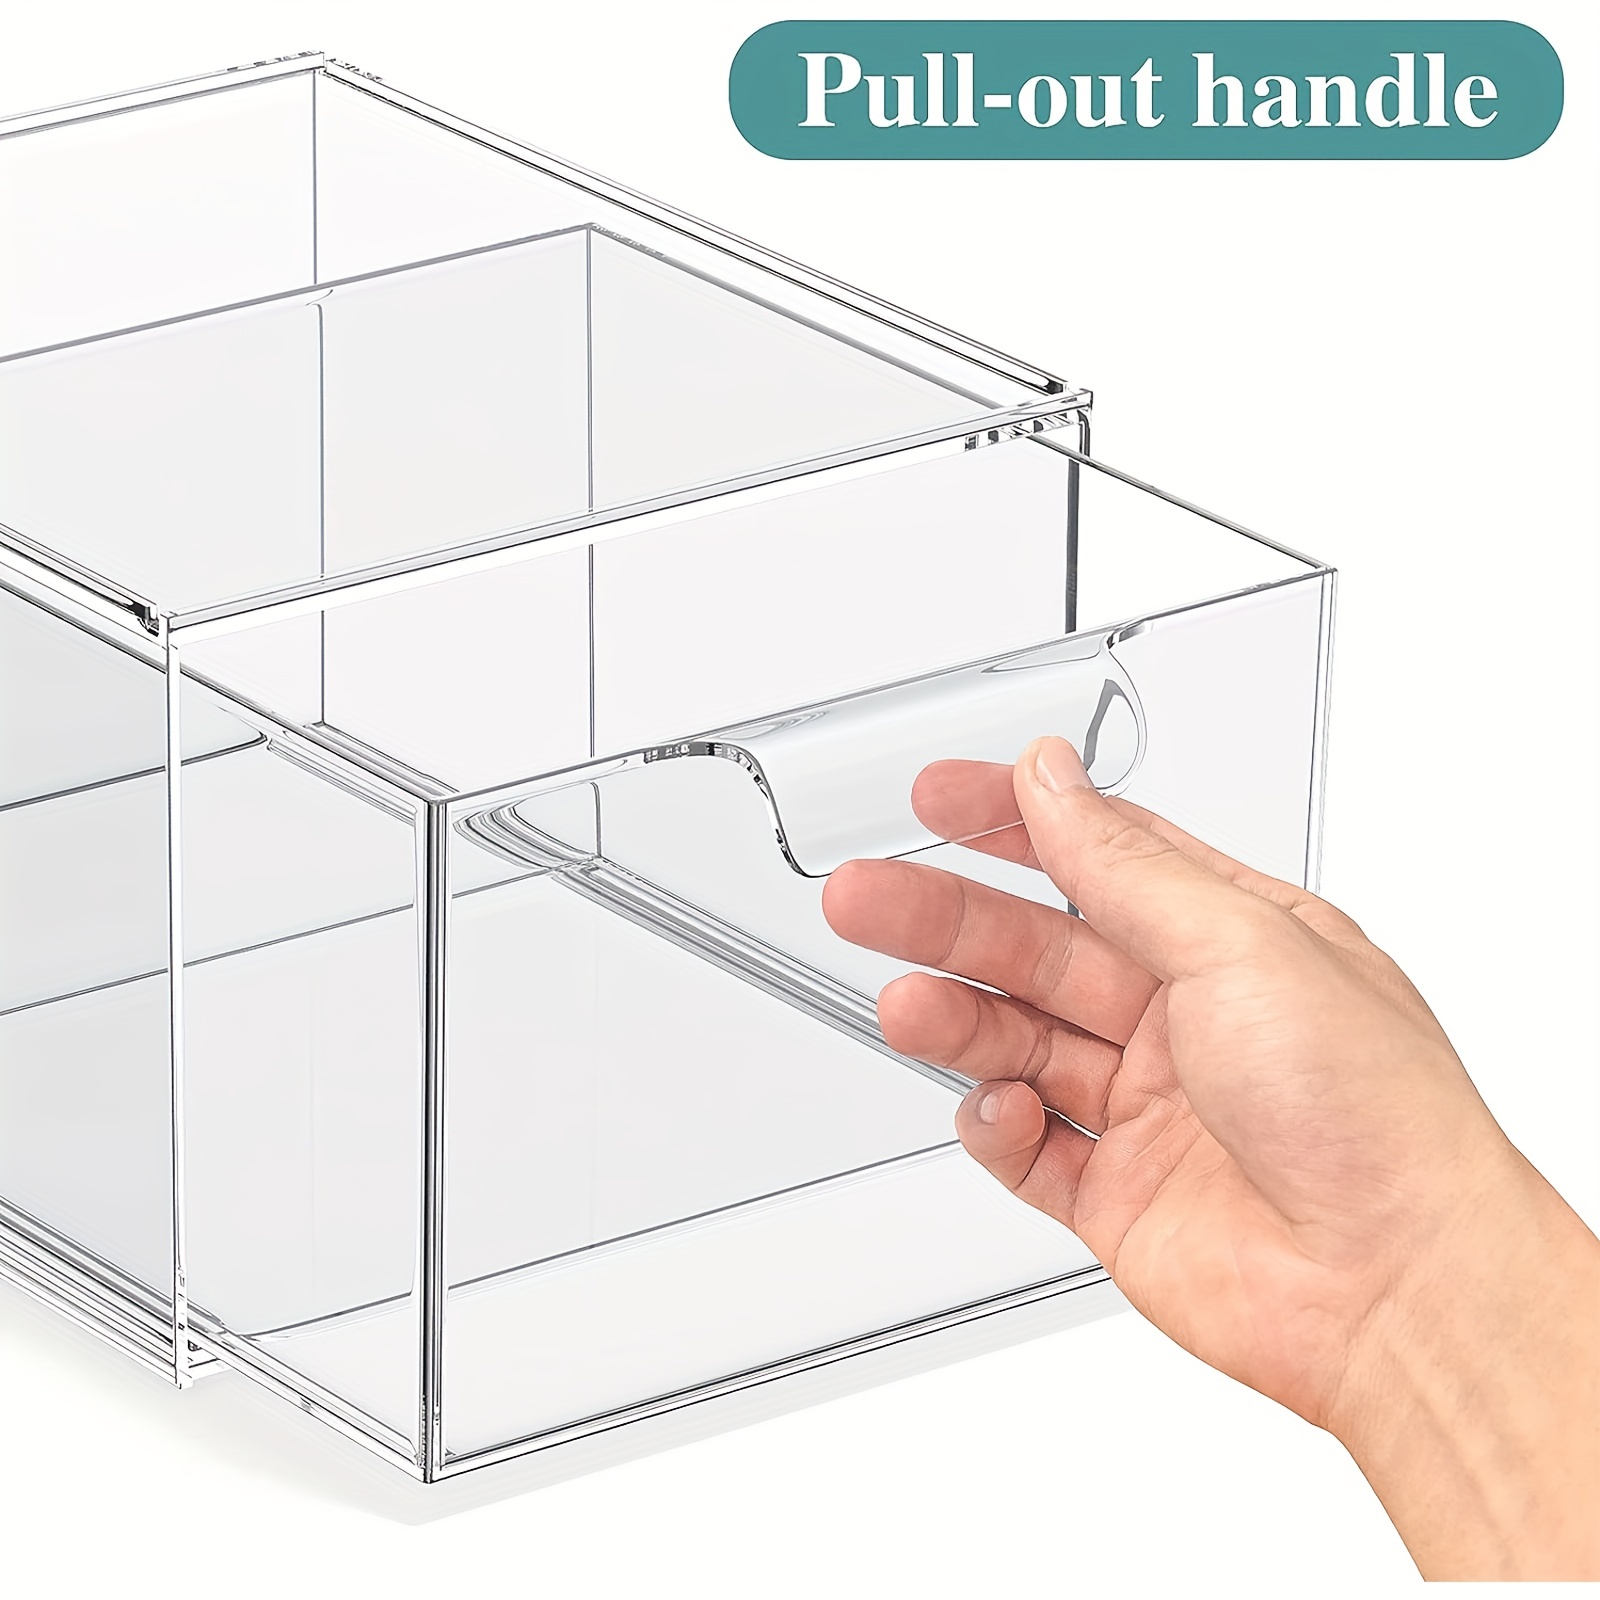 4 Pack Makeup Organizer Storage Drawers, Stackable Skincare Organizers,  Clear Plastic Storage Bins, Acrylic Bathroom Organizers for Vanity,  Undersink, Kitchen Cabinets, Pantry Organization and Storage